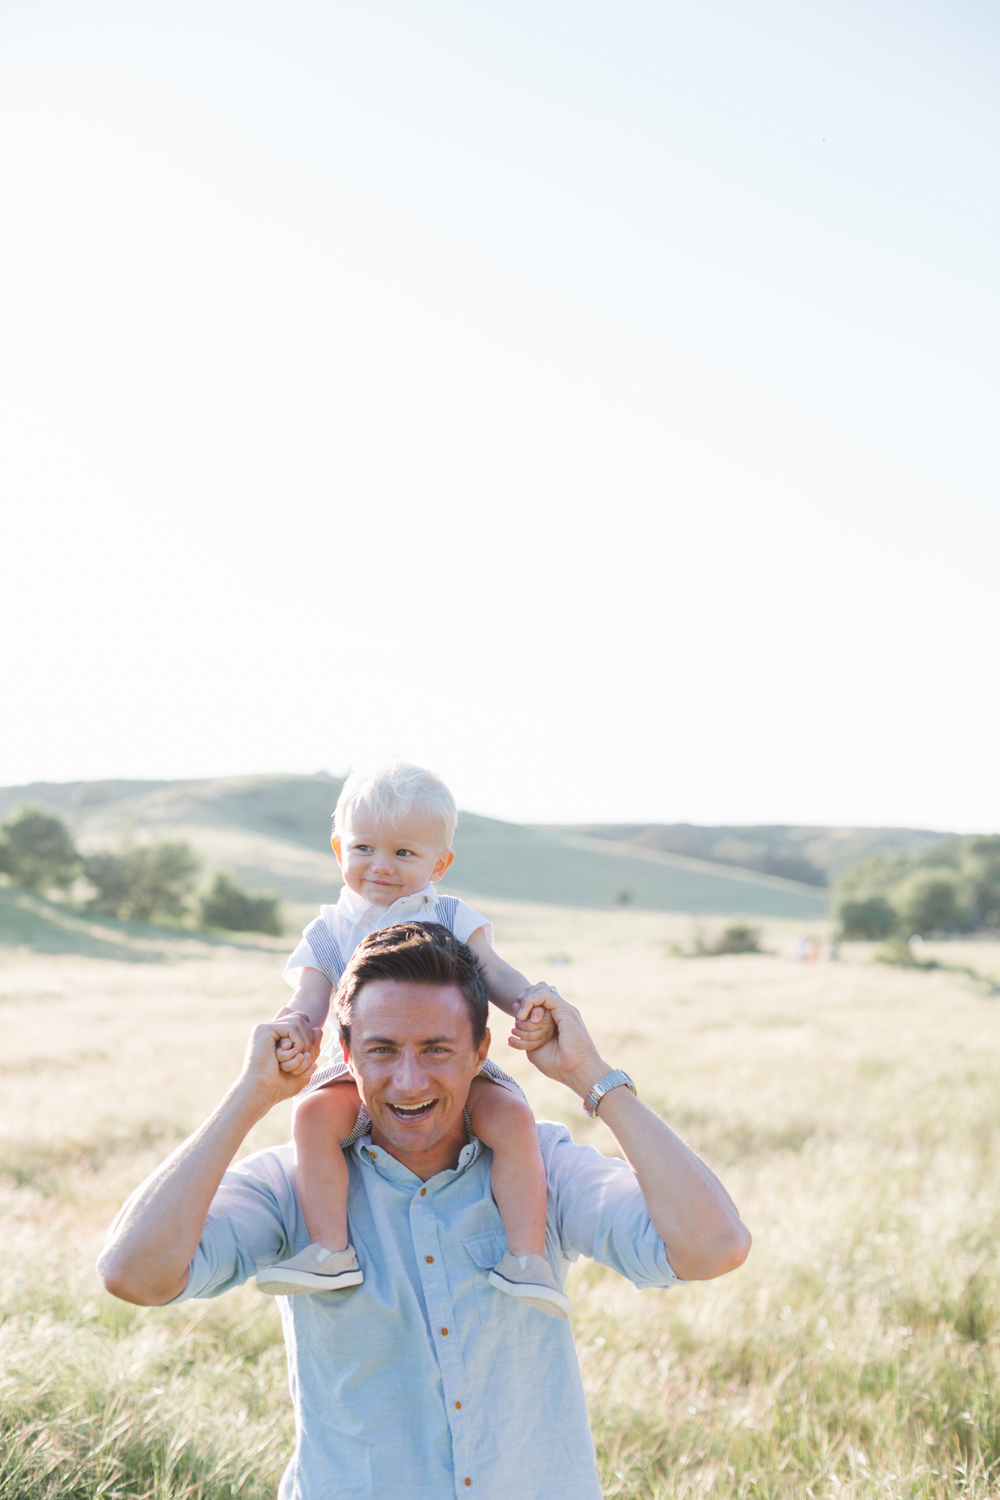 10 tips for your next family photo session with Alison Bernier